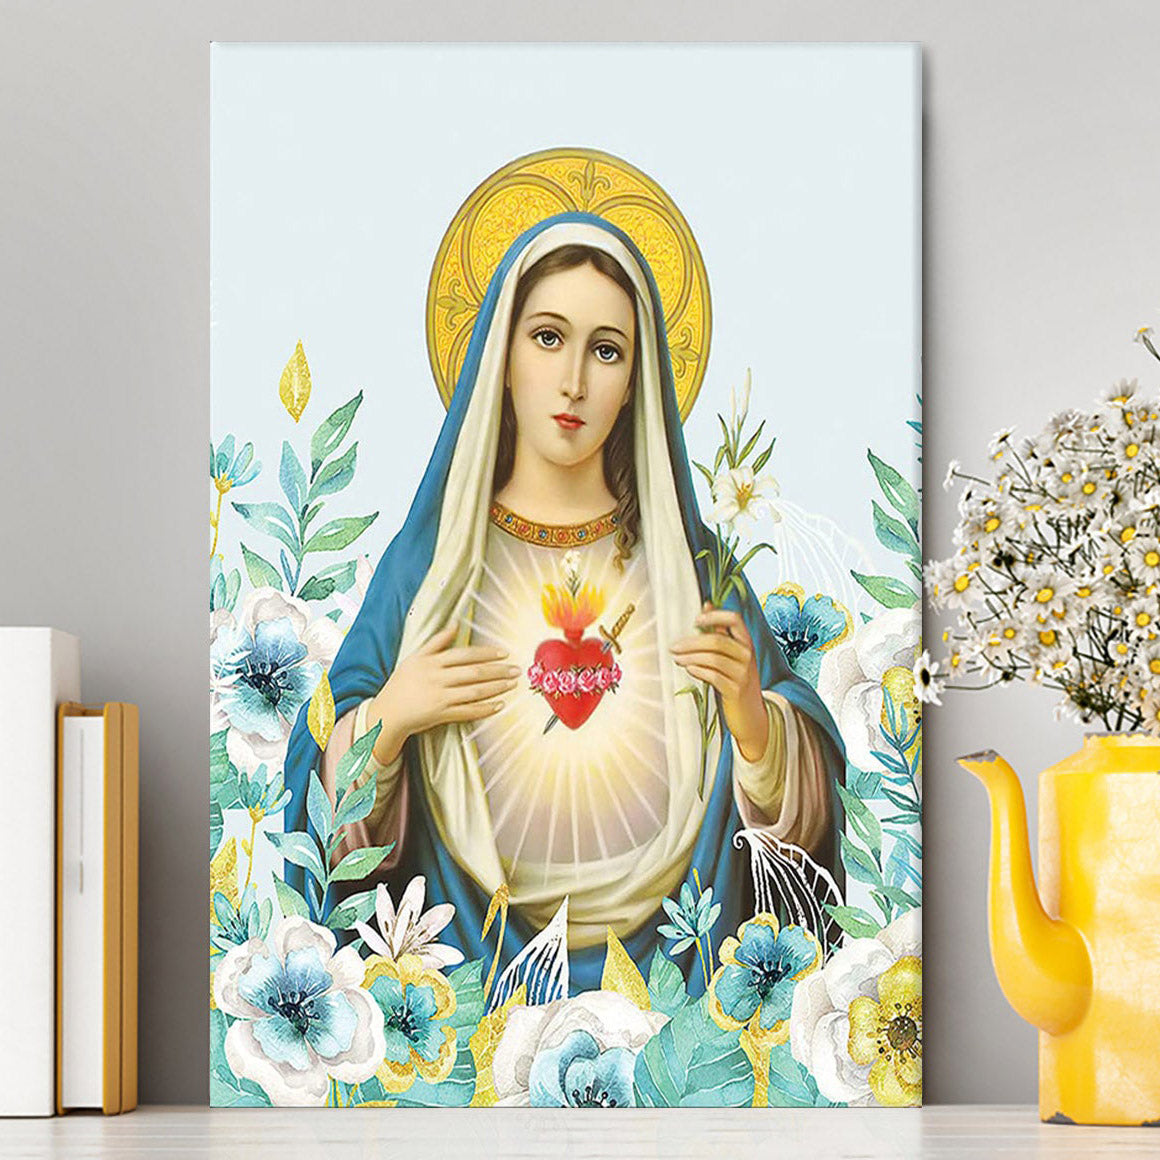 Virgin Mary Picture - Mary Mother Of God Canvas Wall Art - Christian Canvas Wall Art Decor